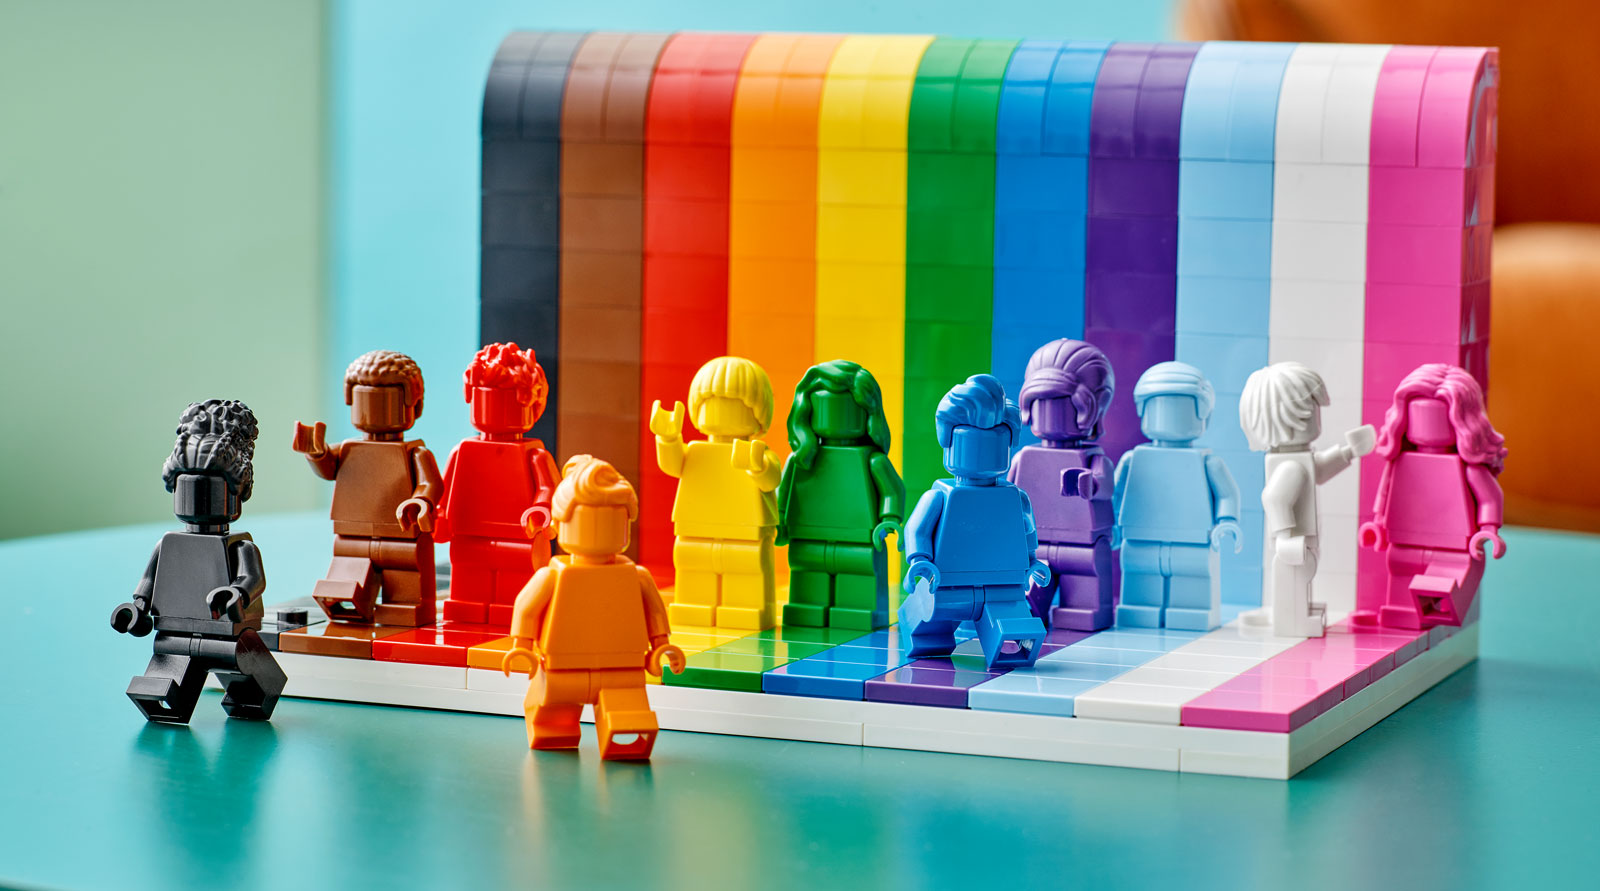 Everyone is Awesome says Lego rainbow tribute to Pride | Wallpaper